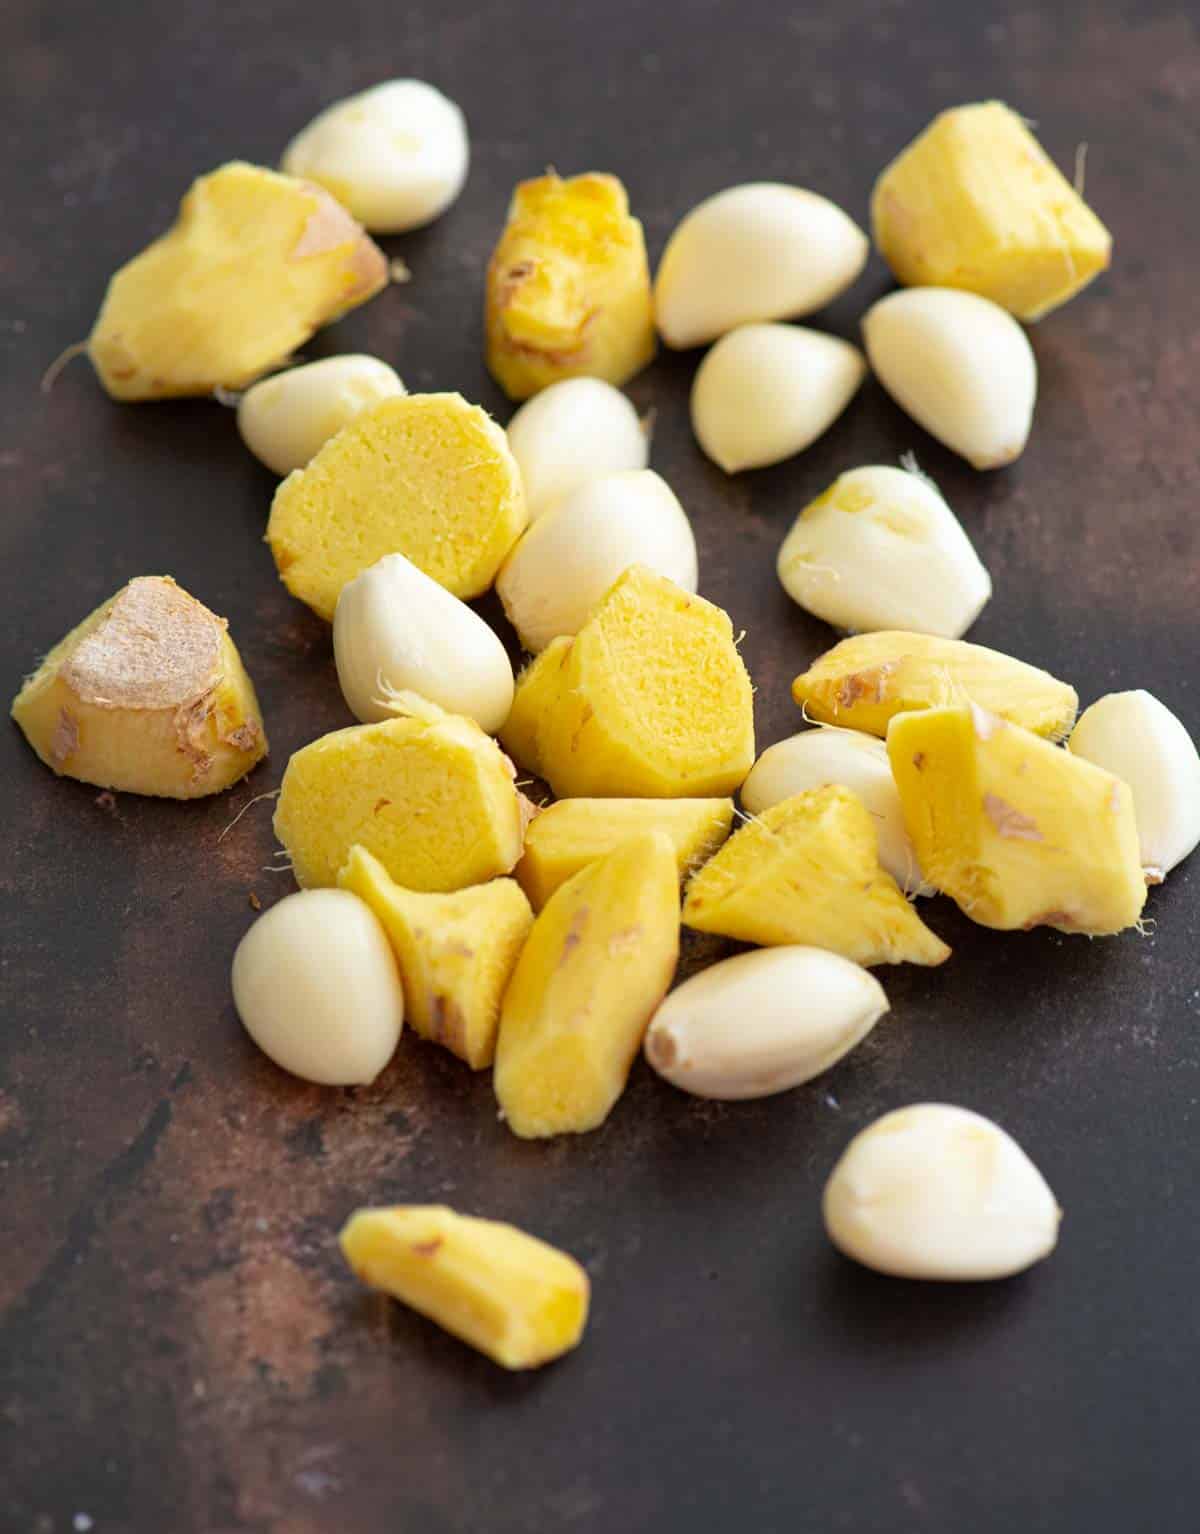 Peeled ginger and garlic on a brown surface